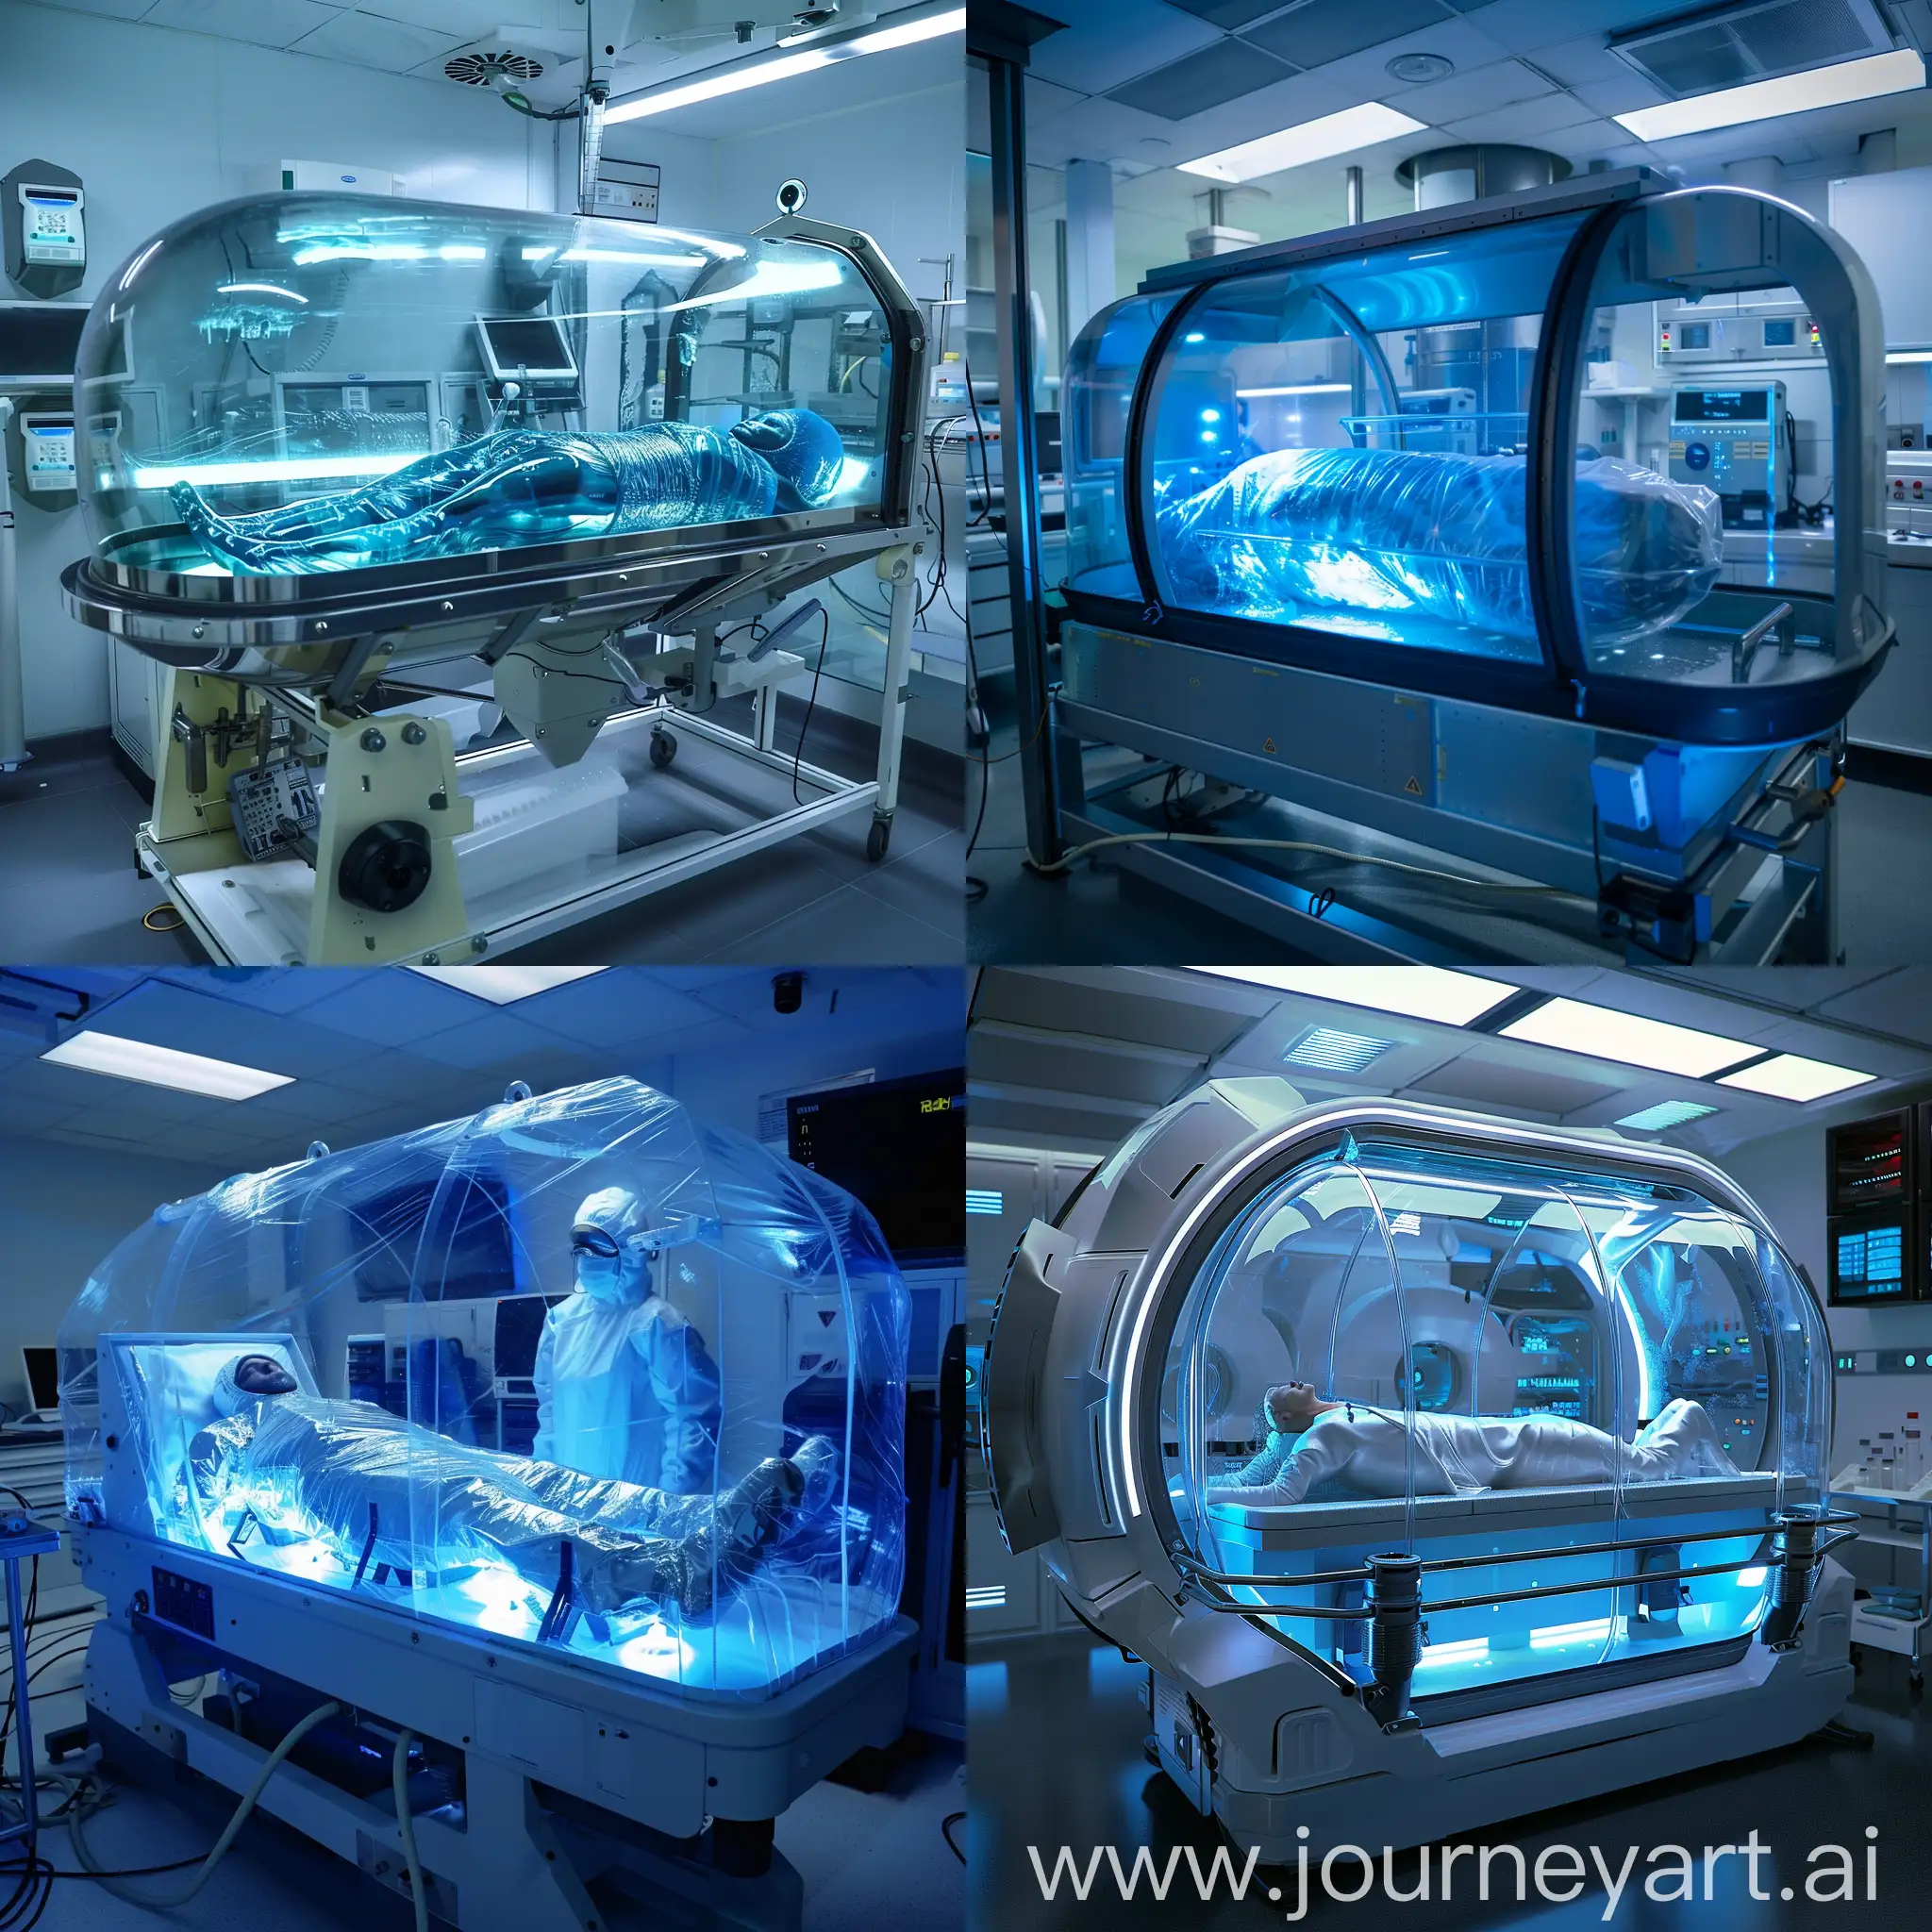 Advanced-Cryogenic-Capsule-for-Human-Preservation-in-a-Laboratory-Setting